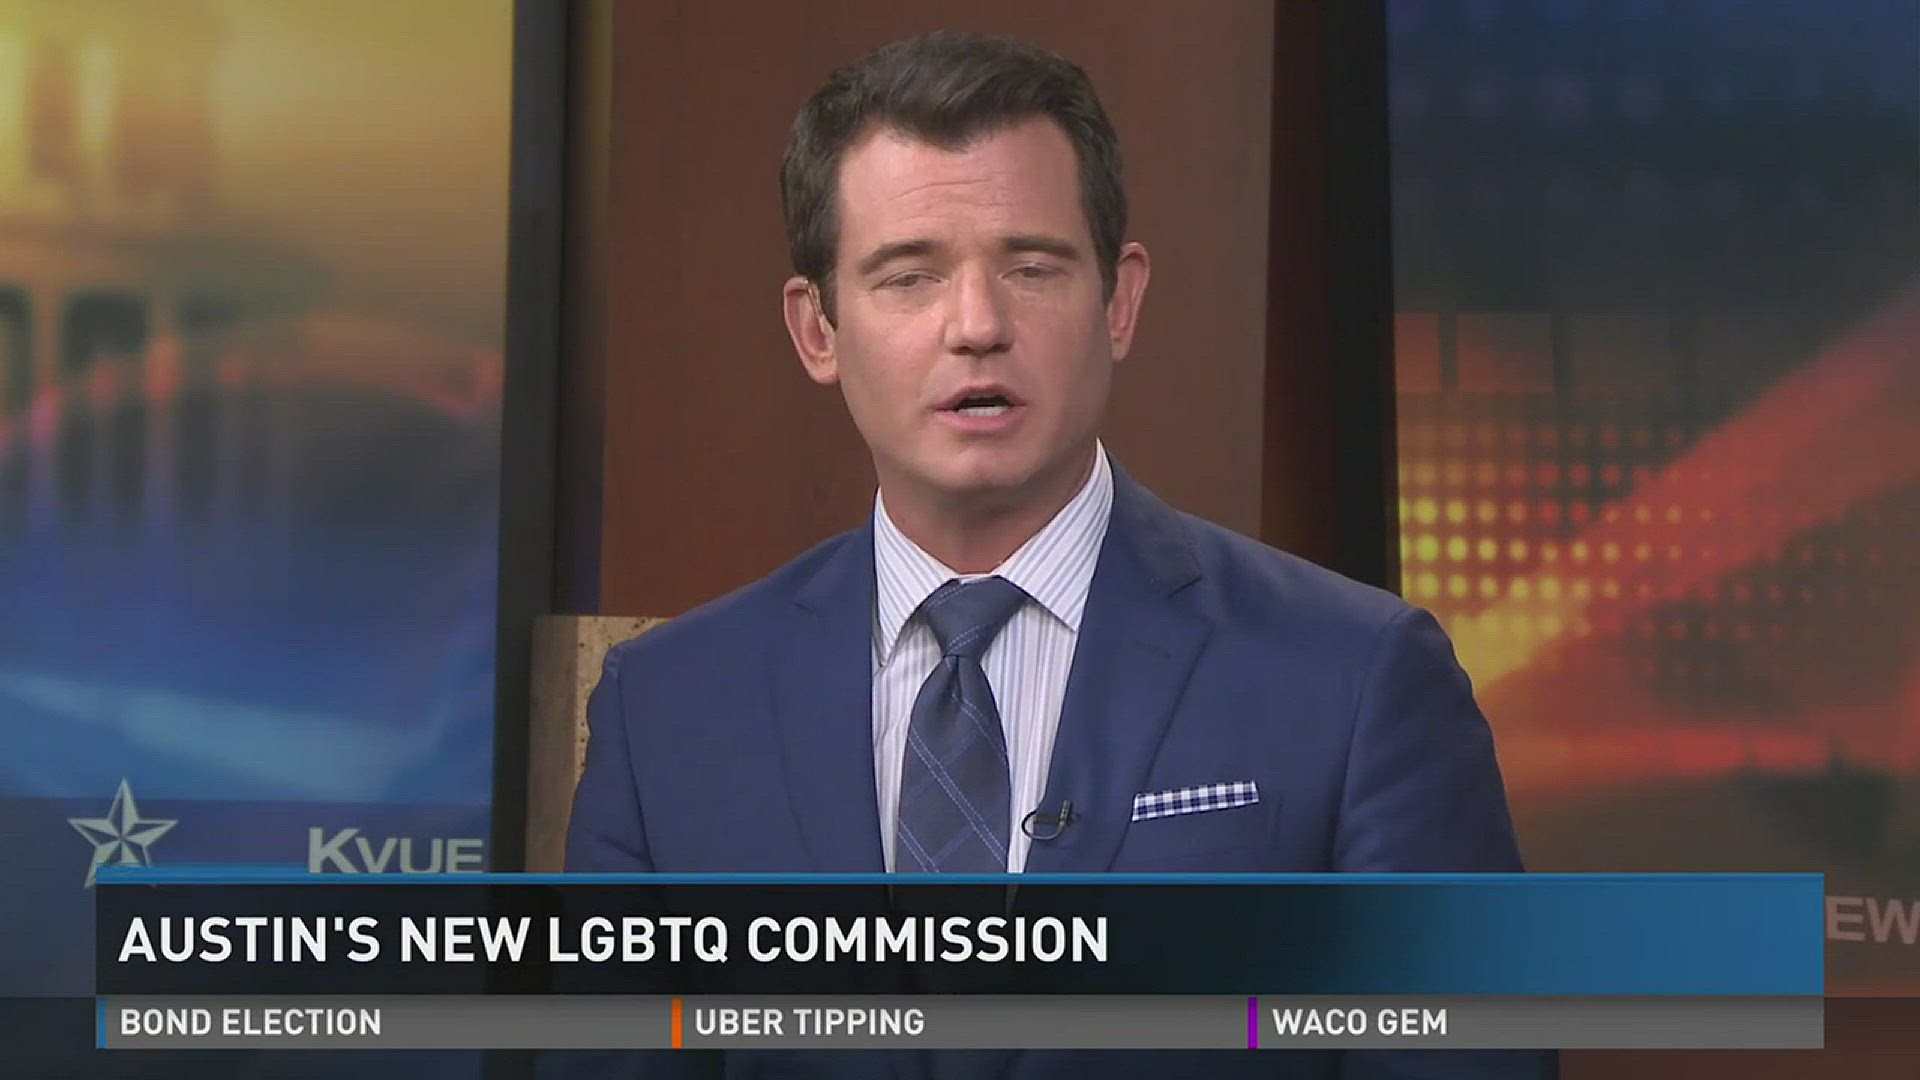 Austin prides itself as a welcoming community. And now there's a new city commission to help ensure it stays that way for the LGBTQ community.